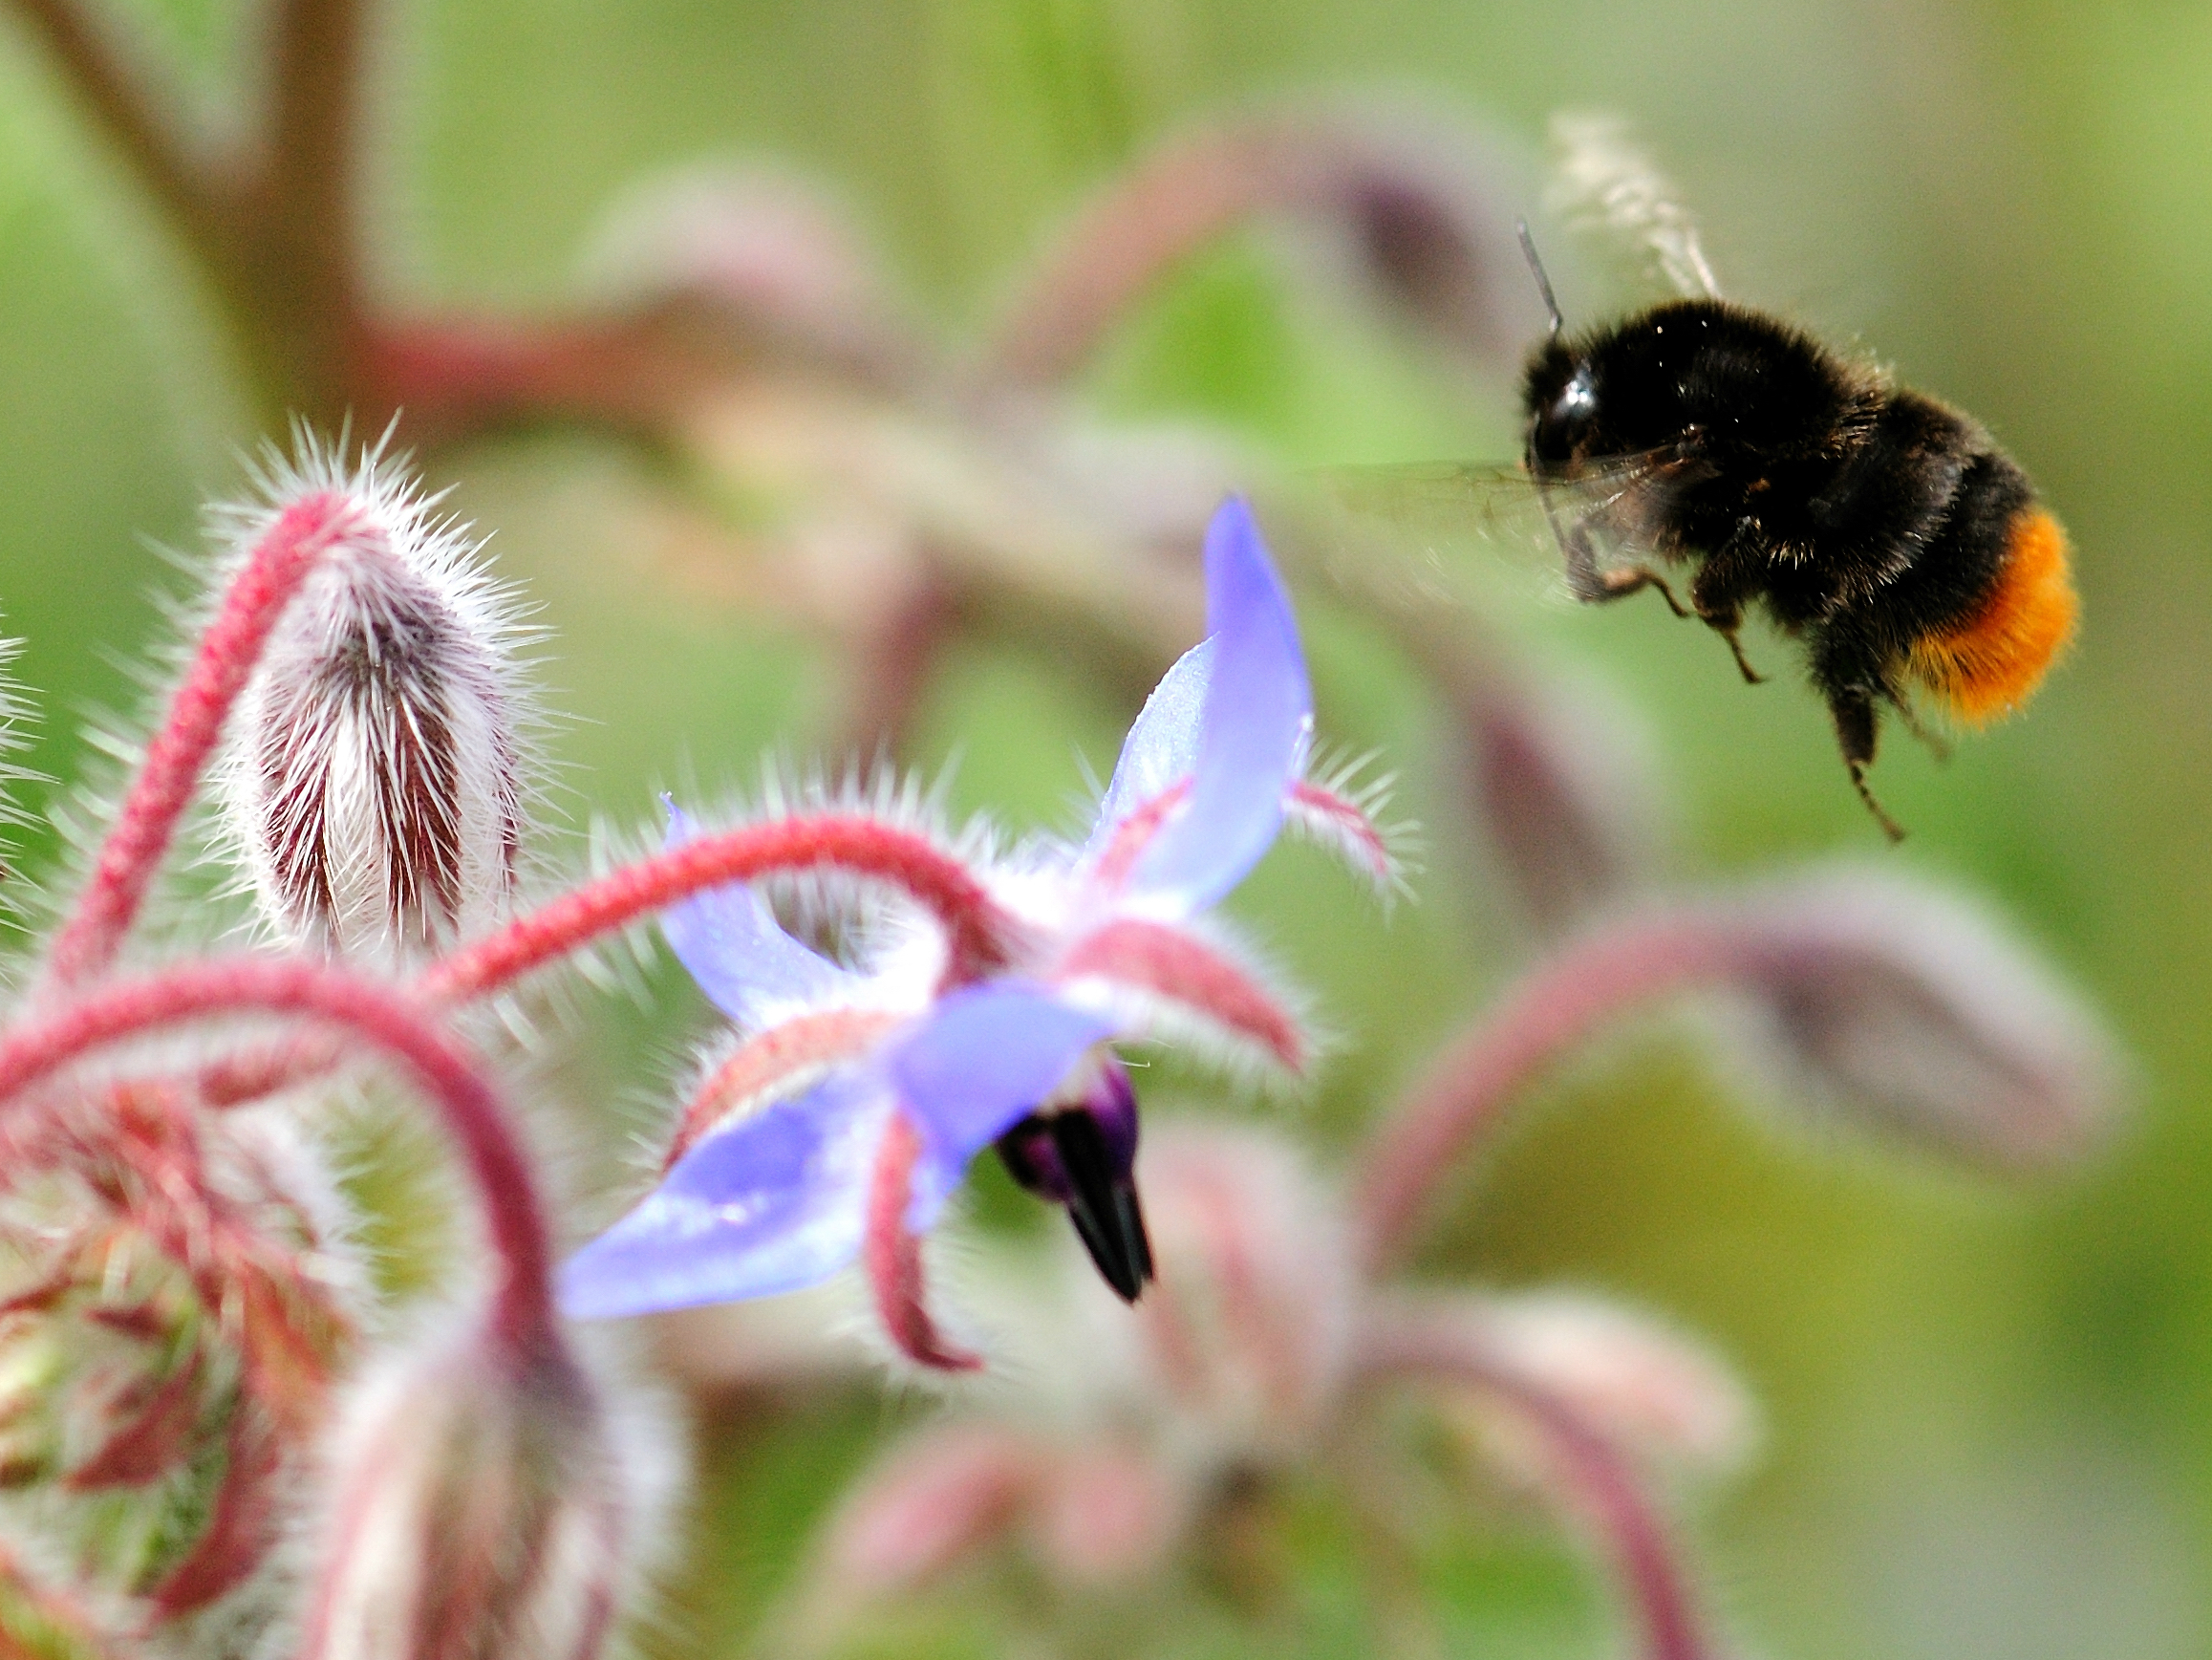 You really can help save bees by planting wildflowers